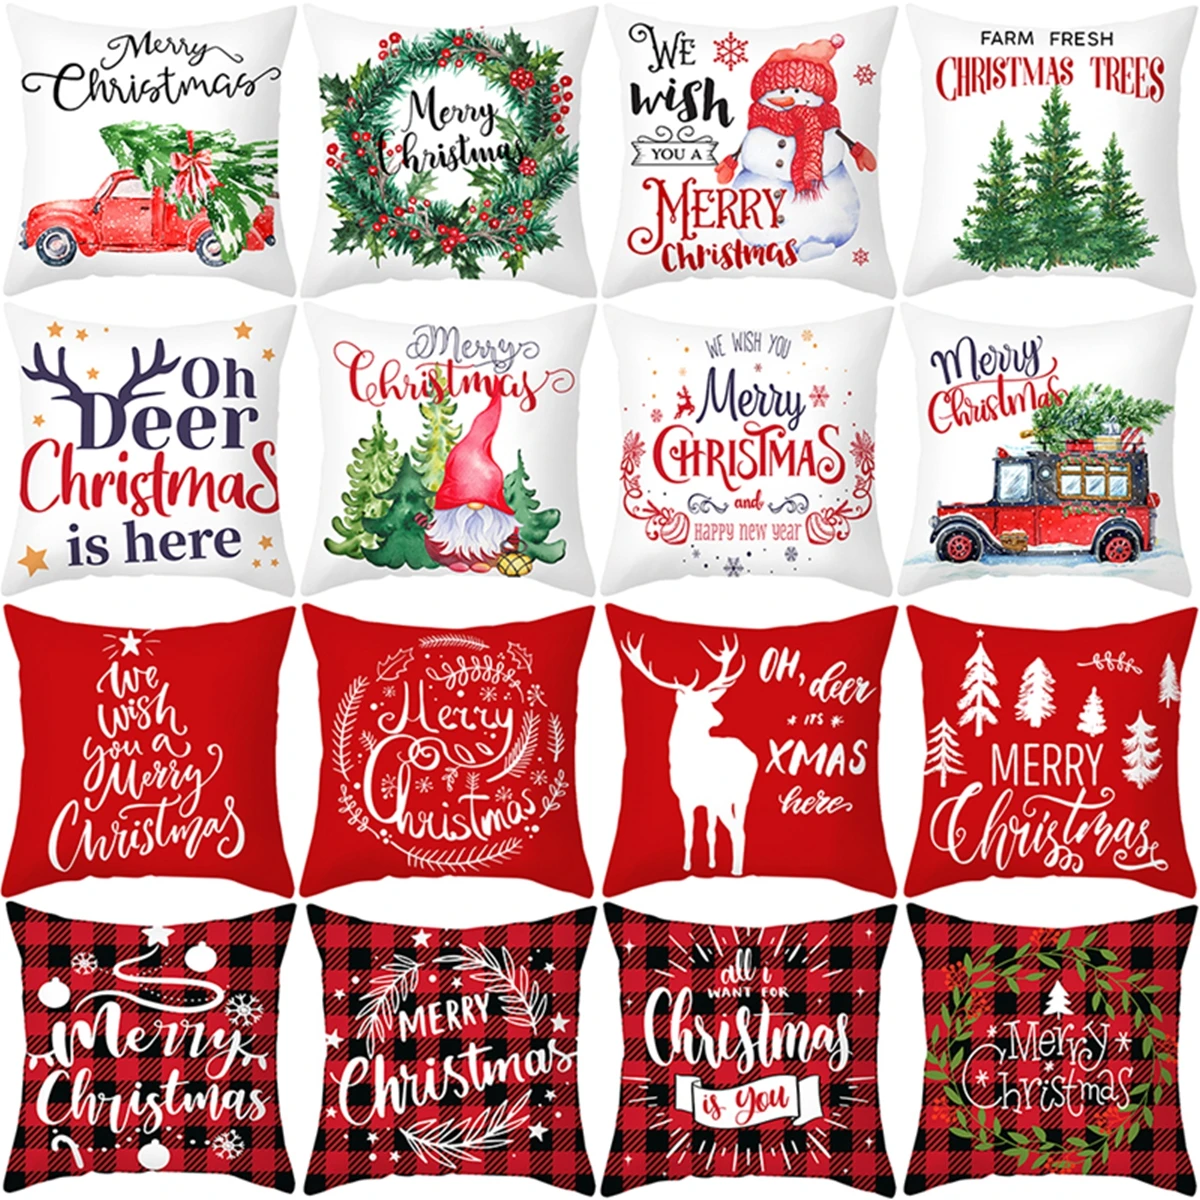 

Santa Claus Pillowcase Merry Christmas Decoration for Home Snowmen Elk Christmas Ornements Xmas Supplies New Year Merry Coussin